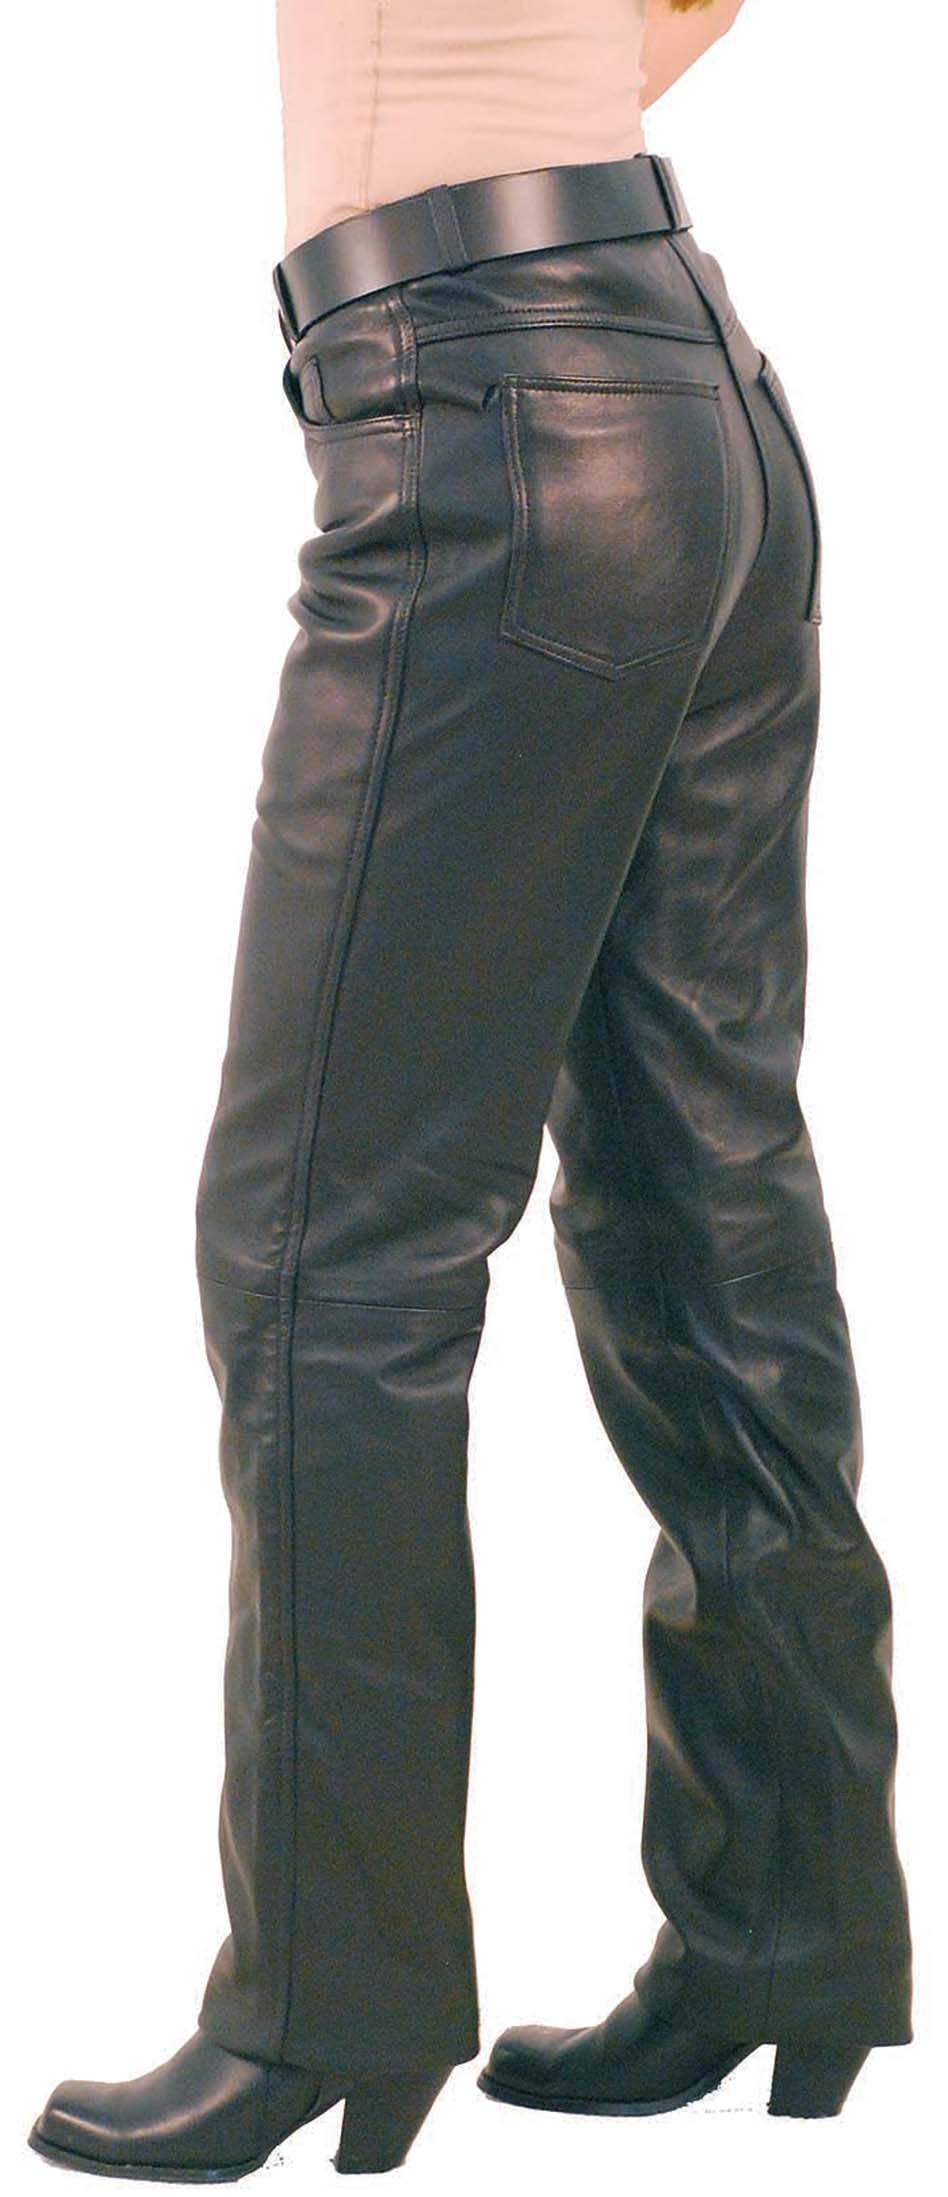 Leather Pants Women - Buy Leather Pants Women online at Best Prices in  India